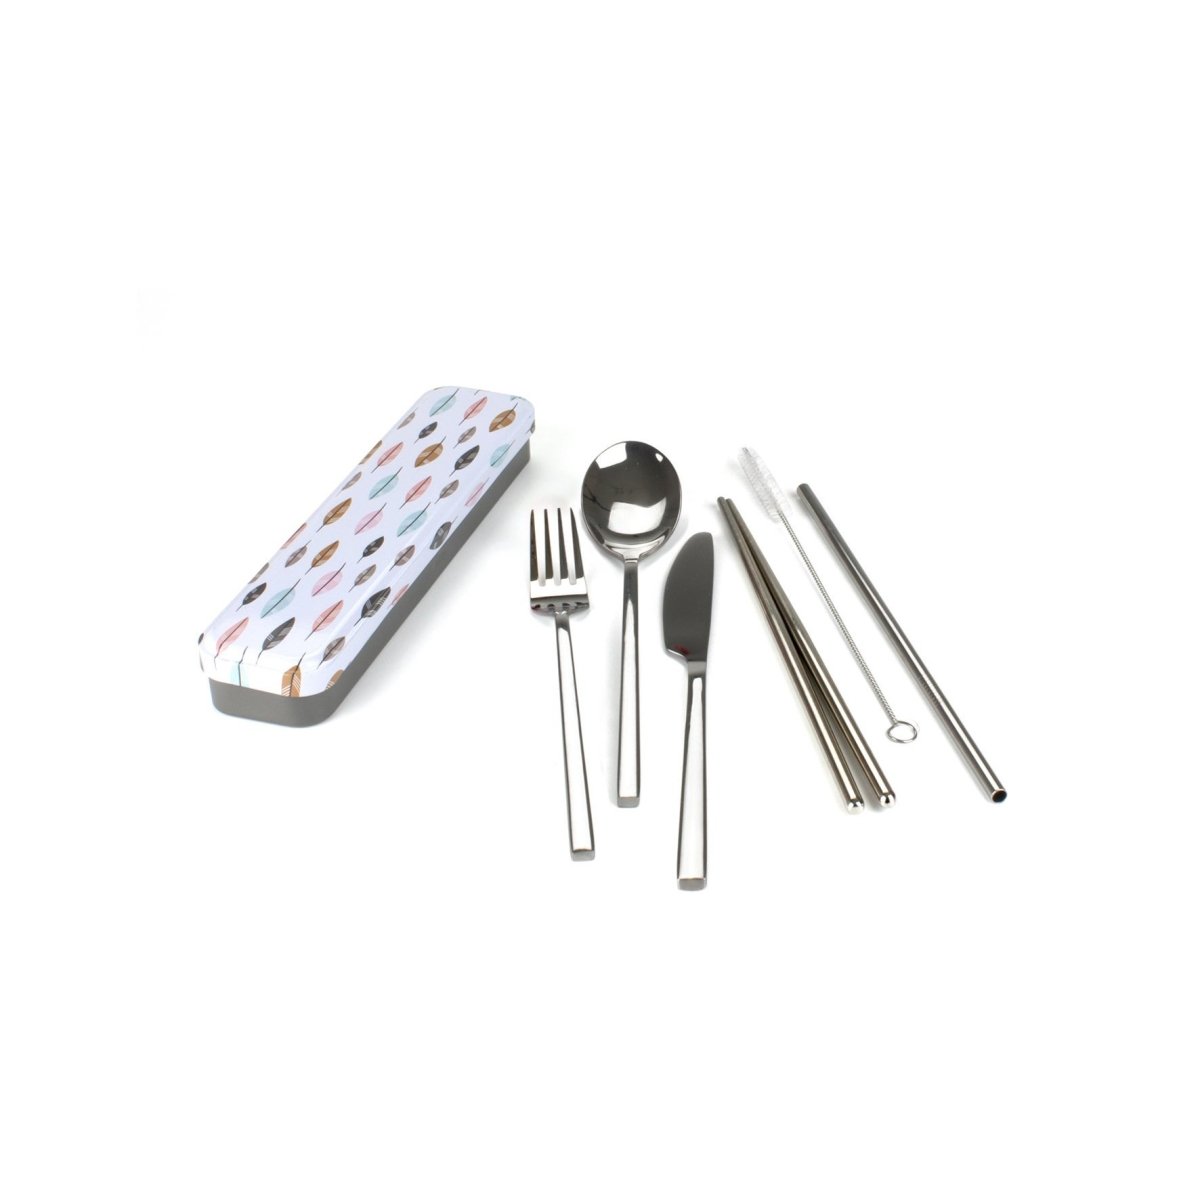 Carry Your Cutlery Leaves - Minimax